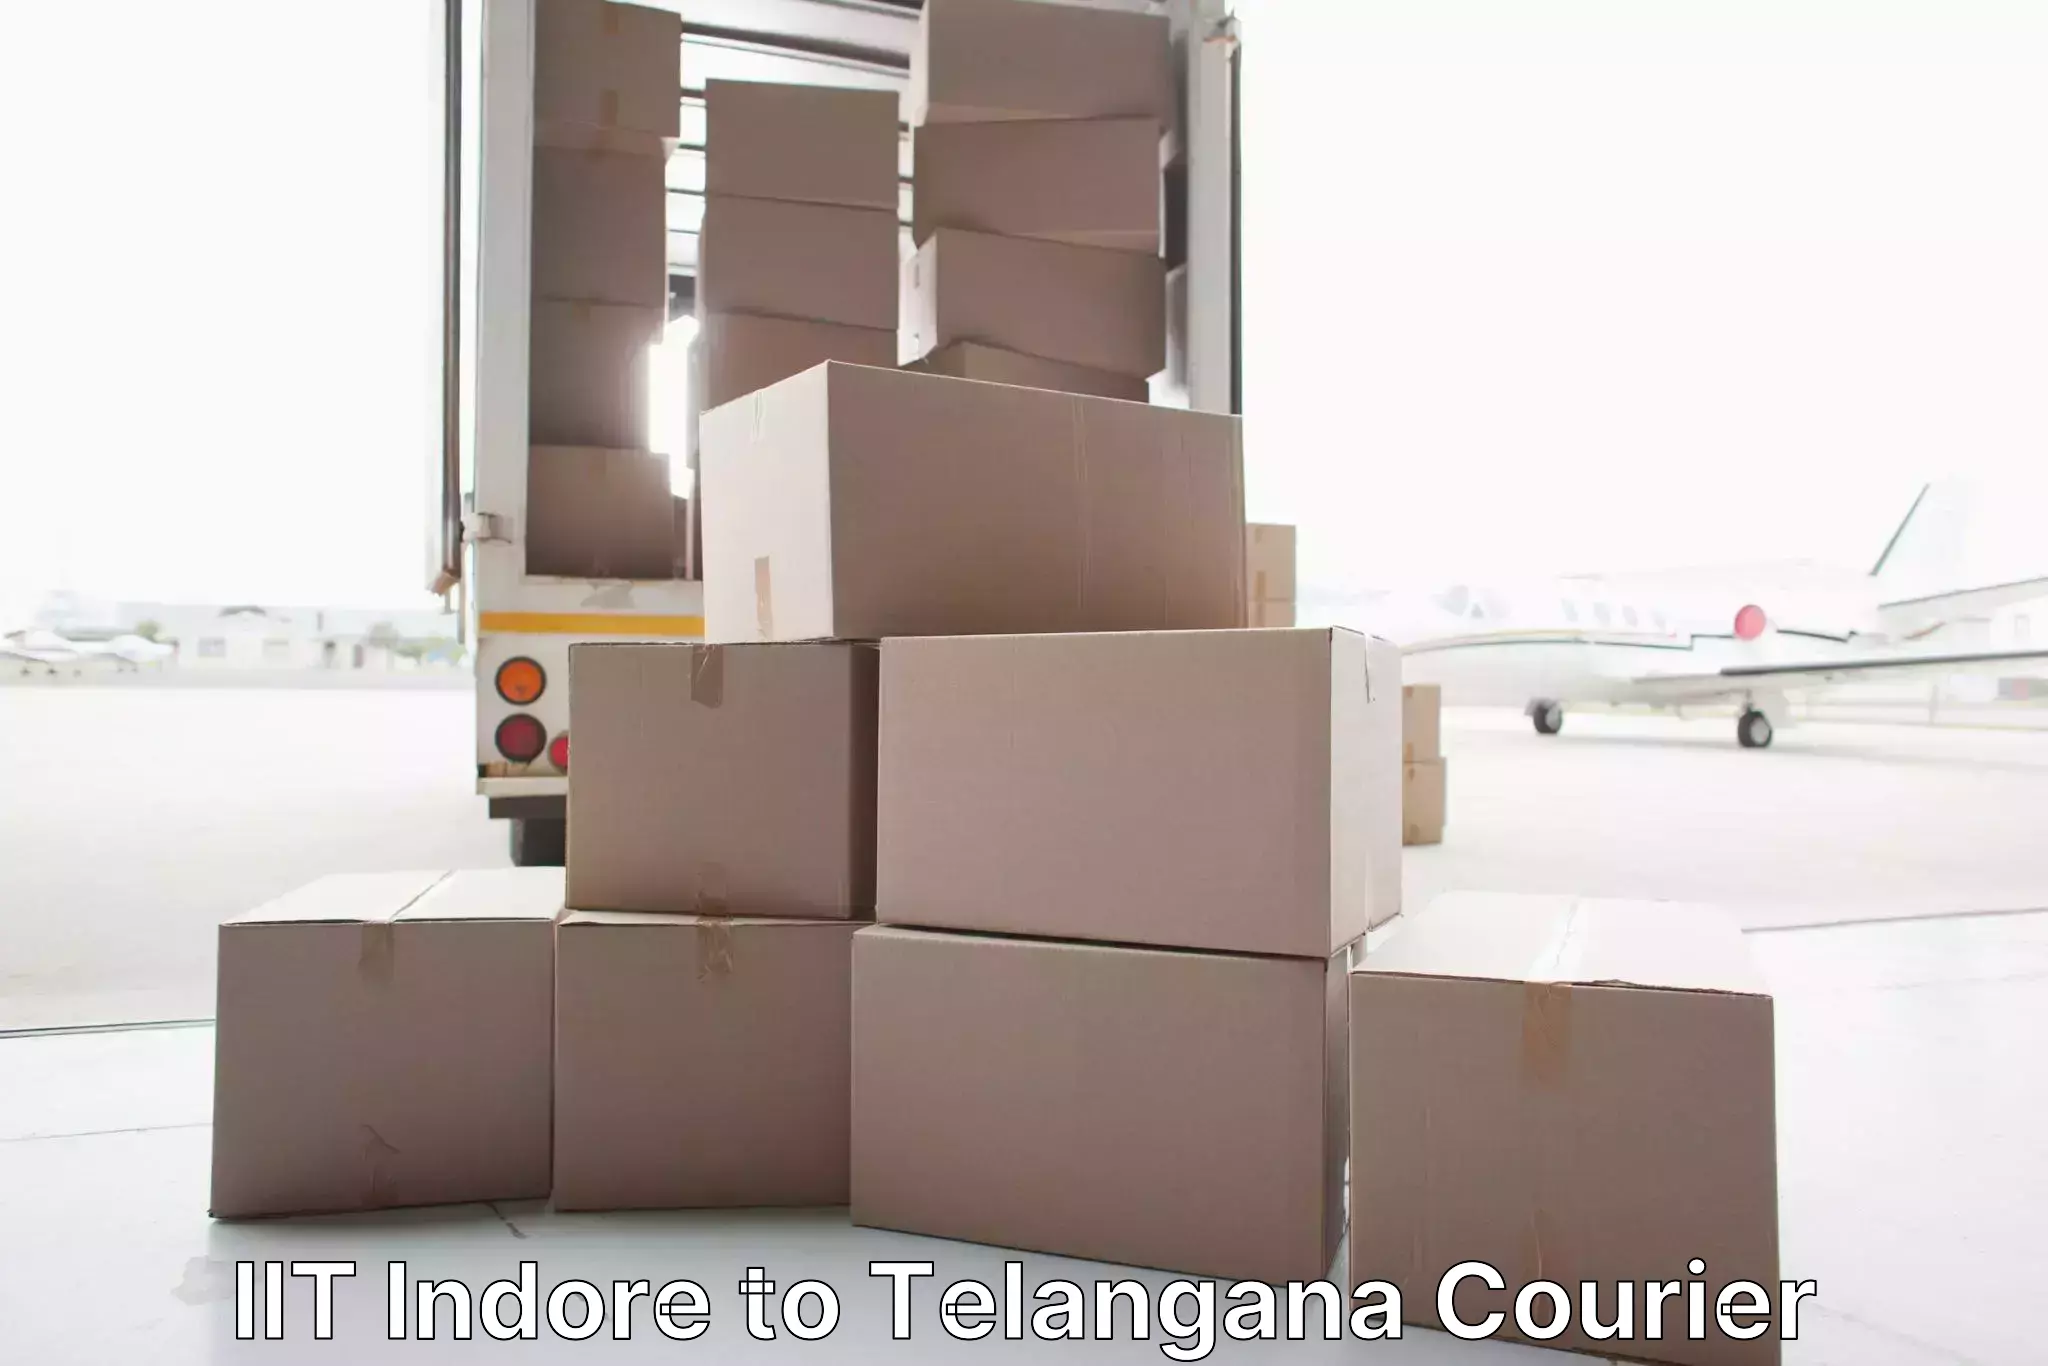 Furniture delivery service in IIT Indore to Gangadhara